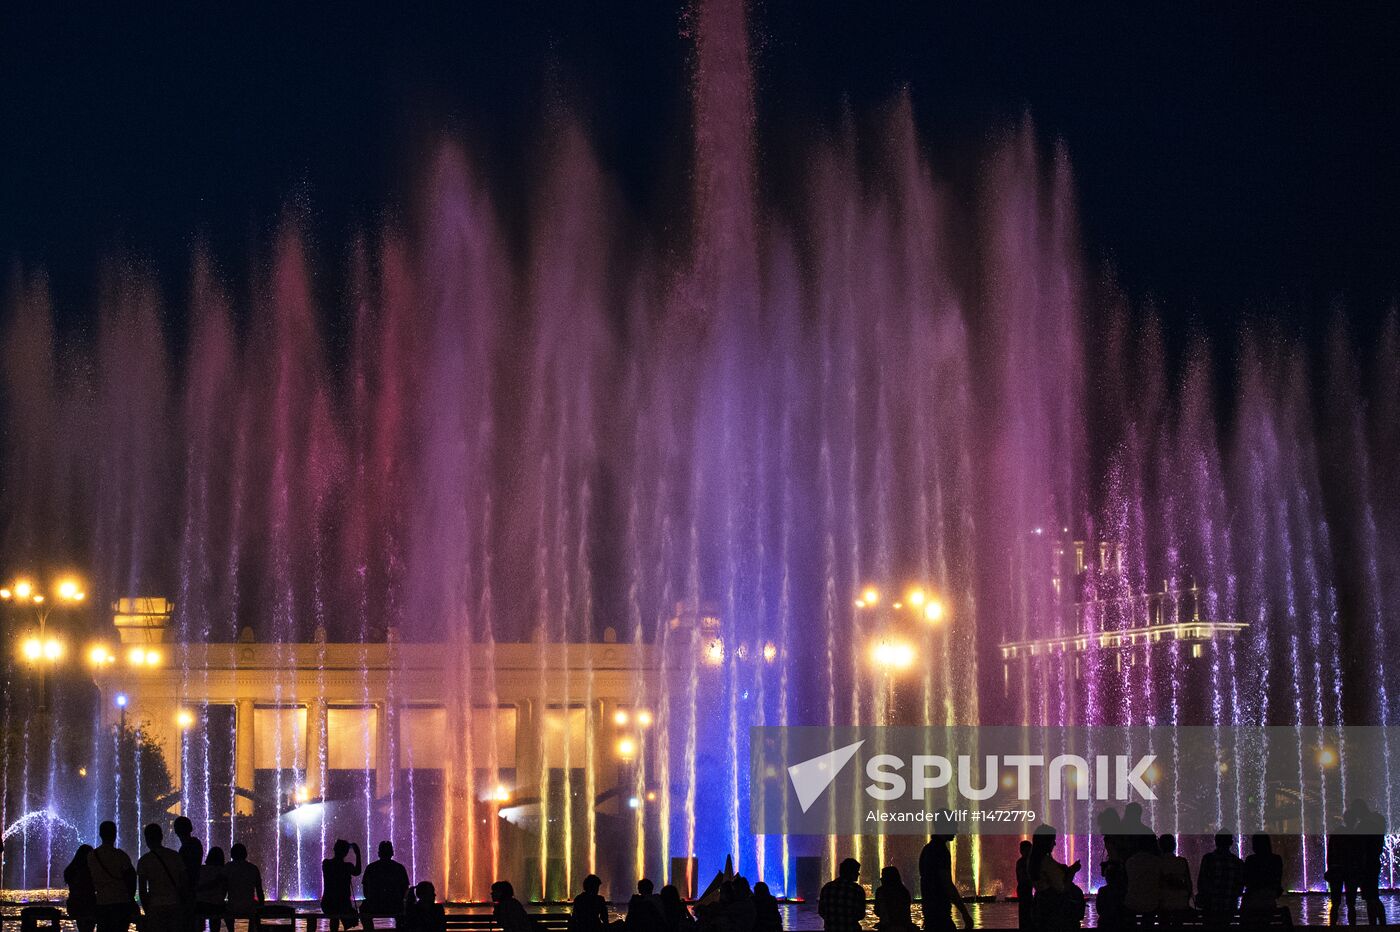 Singing fountains in Moscow's Gorky Park